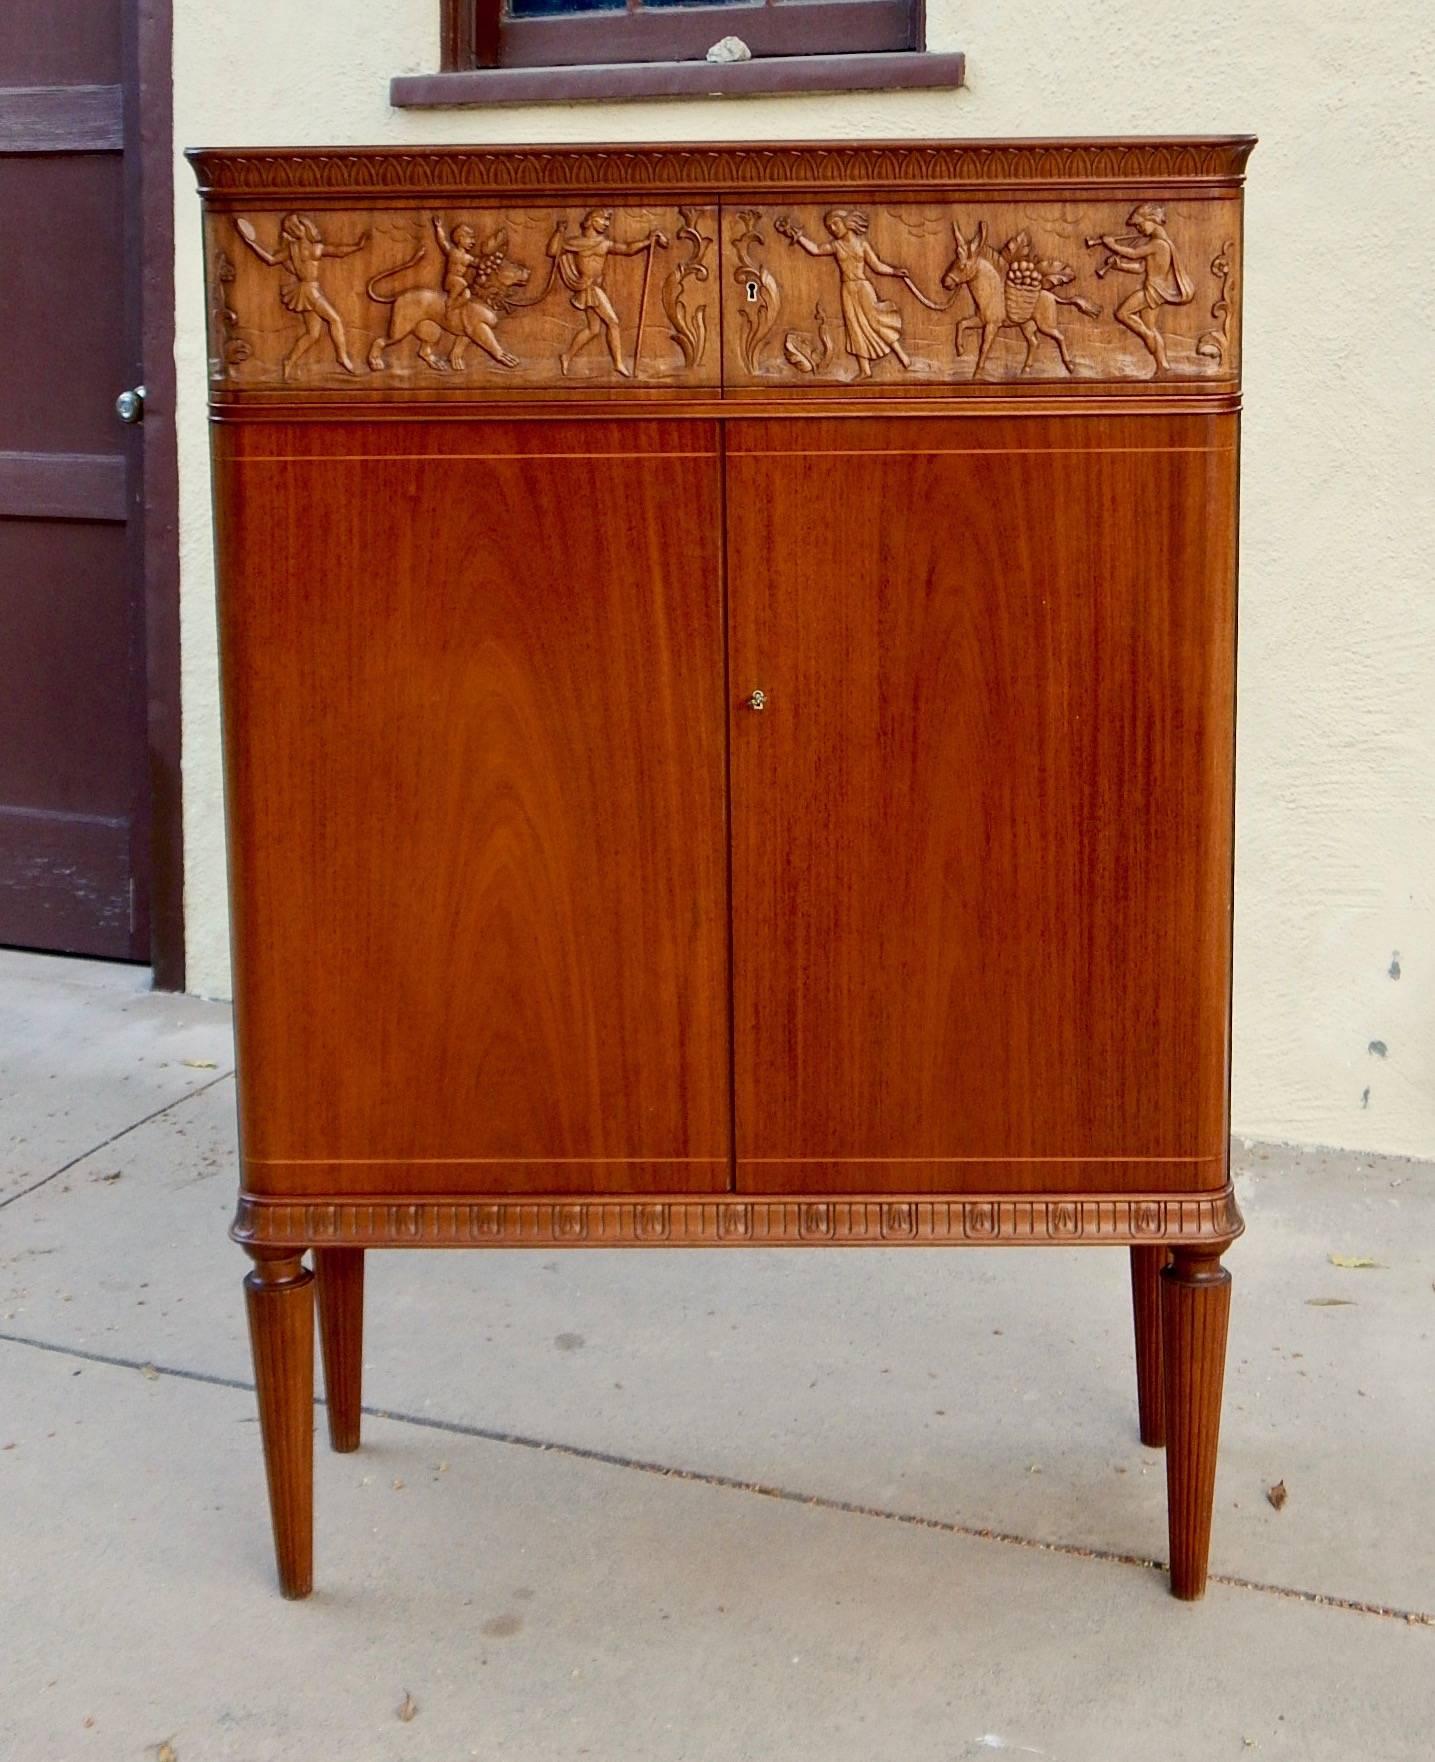 Swedish, 1940s moderne storage cabinet by Eugene Höglund, Vetlanda, Sweden, circa 1940. Doors in open grained mahogany Upper cabinet in stained solid birch with high relief carving. There are four drawers behind the swinging relief doors. There are